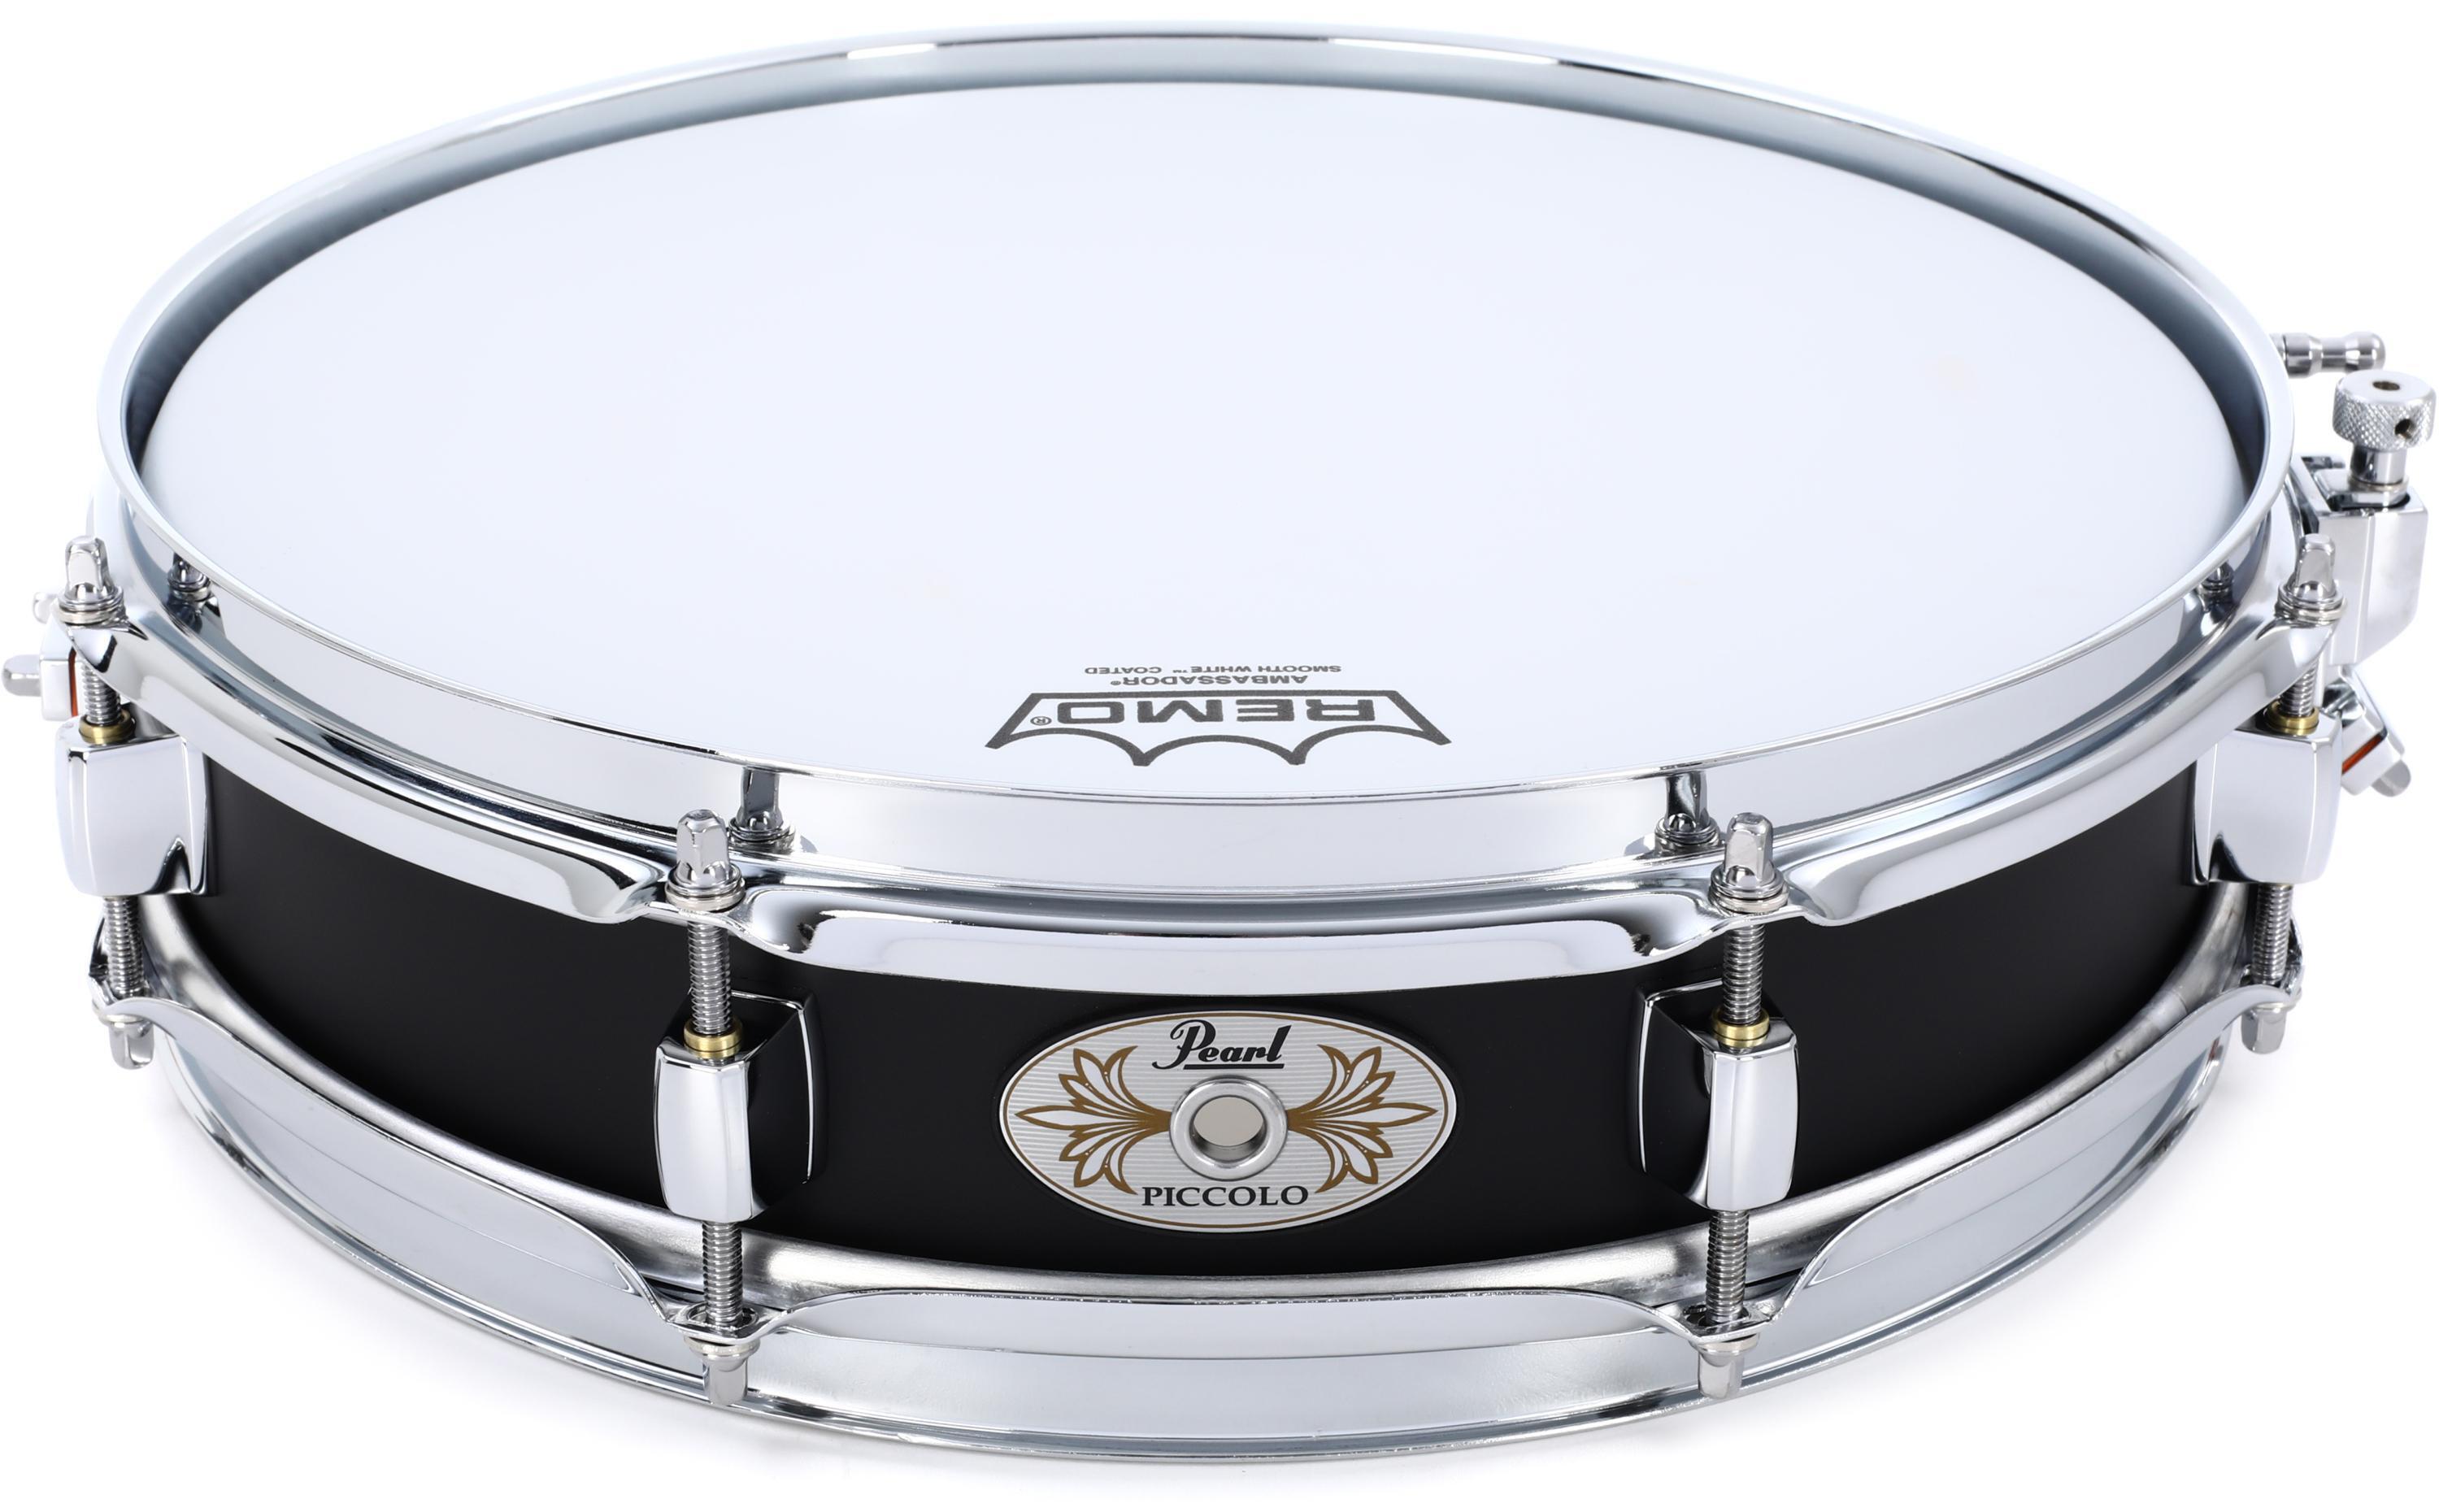 The Pearl S1330B Piccolo Snare - JB Music Philippines